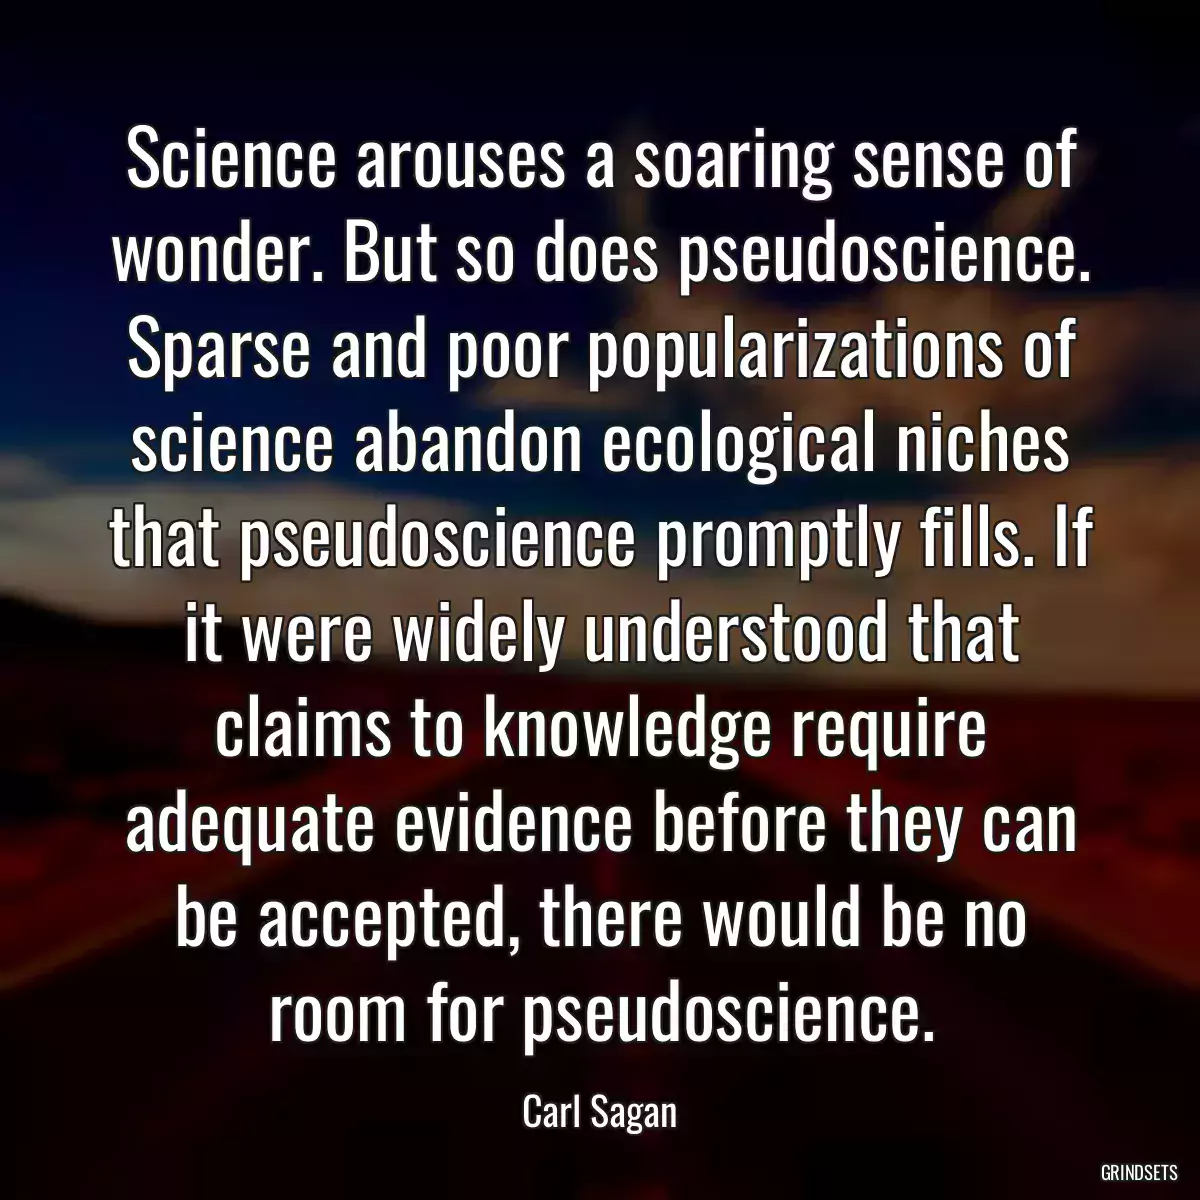 Science arouses a soaring sense of wonder. But so does pseudoscience. Sparse and poor popularizations of science abandon ecological niches that pseudoscience promptly fills. If it were widely understood that claims to knowledge require adequate evidence before they can be accepted, there would be no room for pseudoscience.